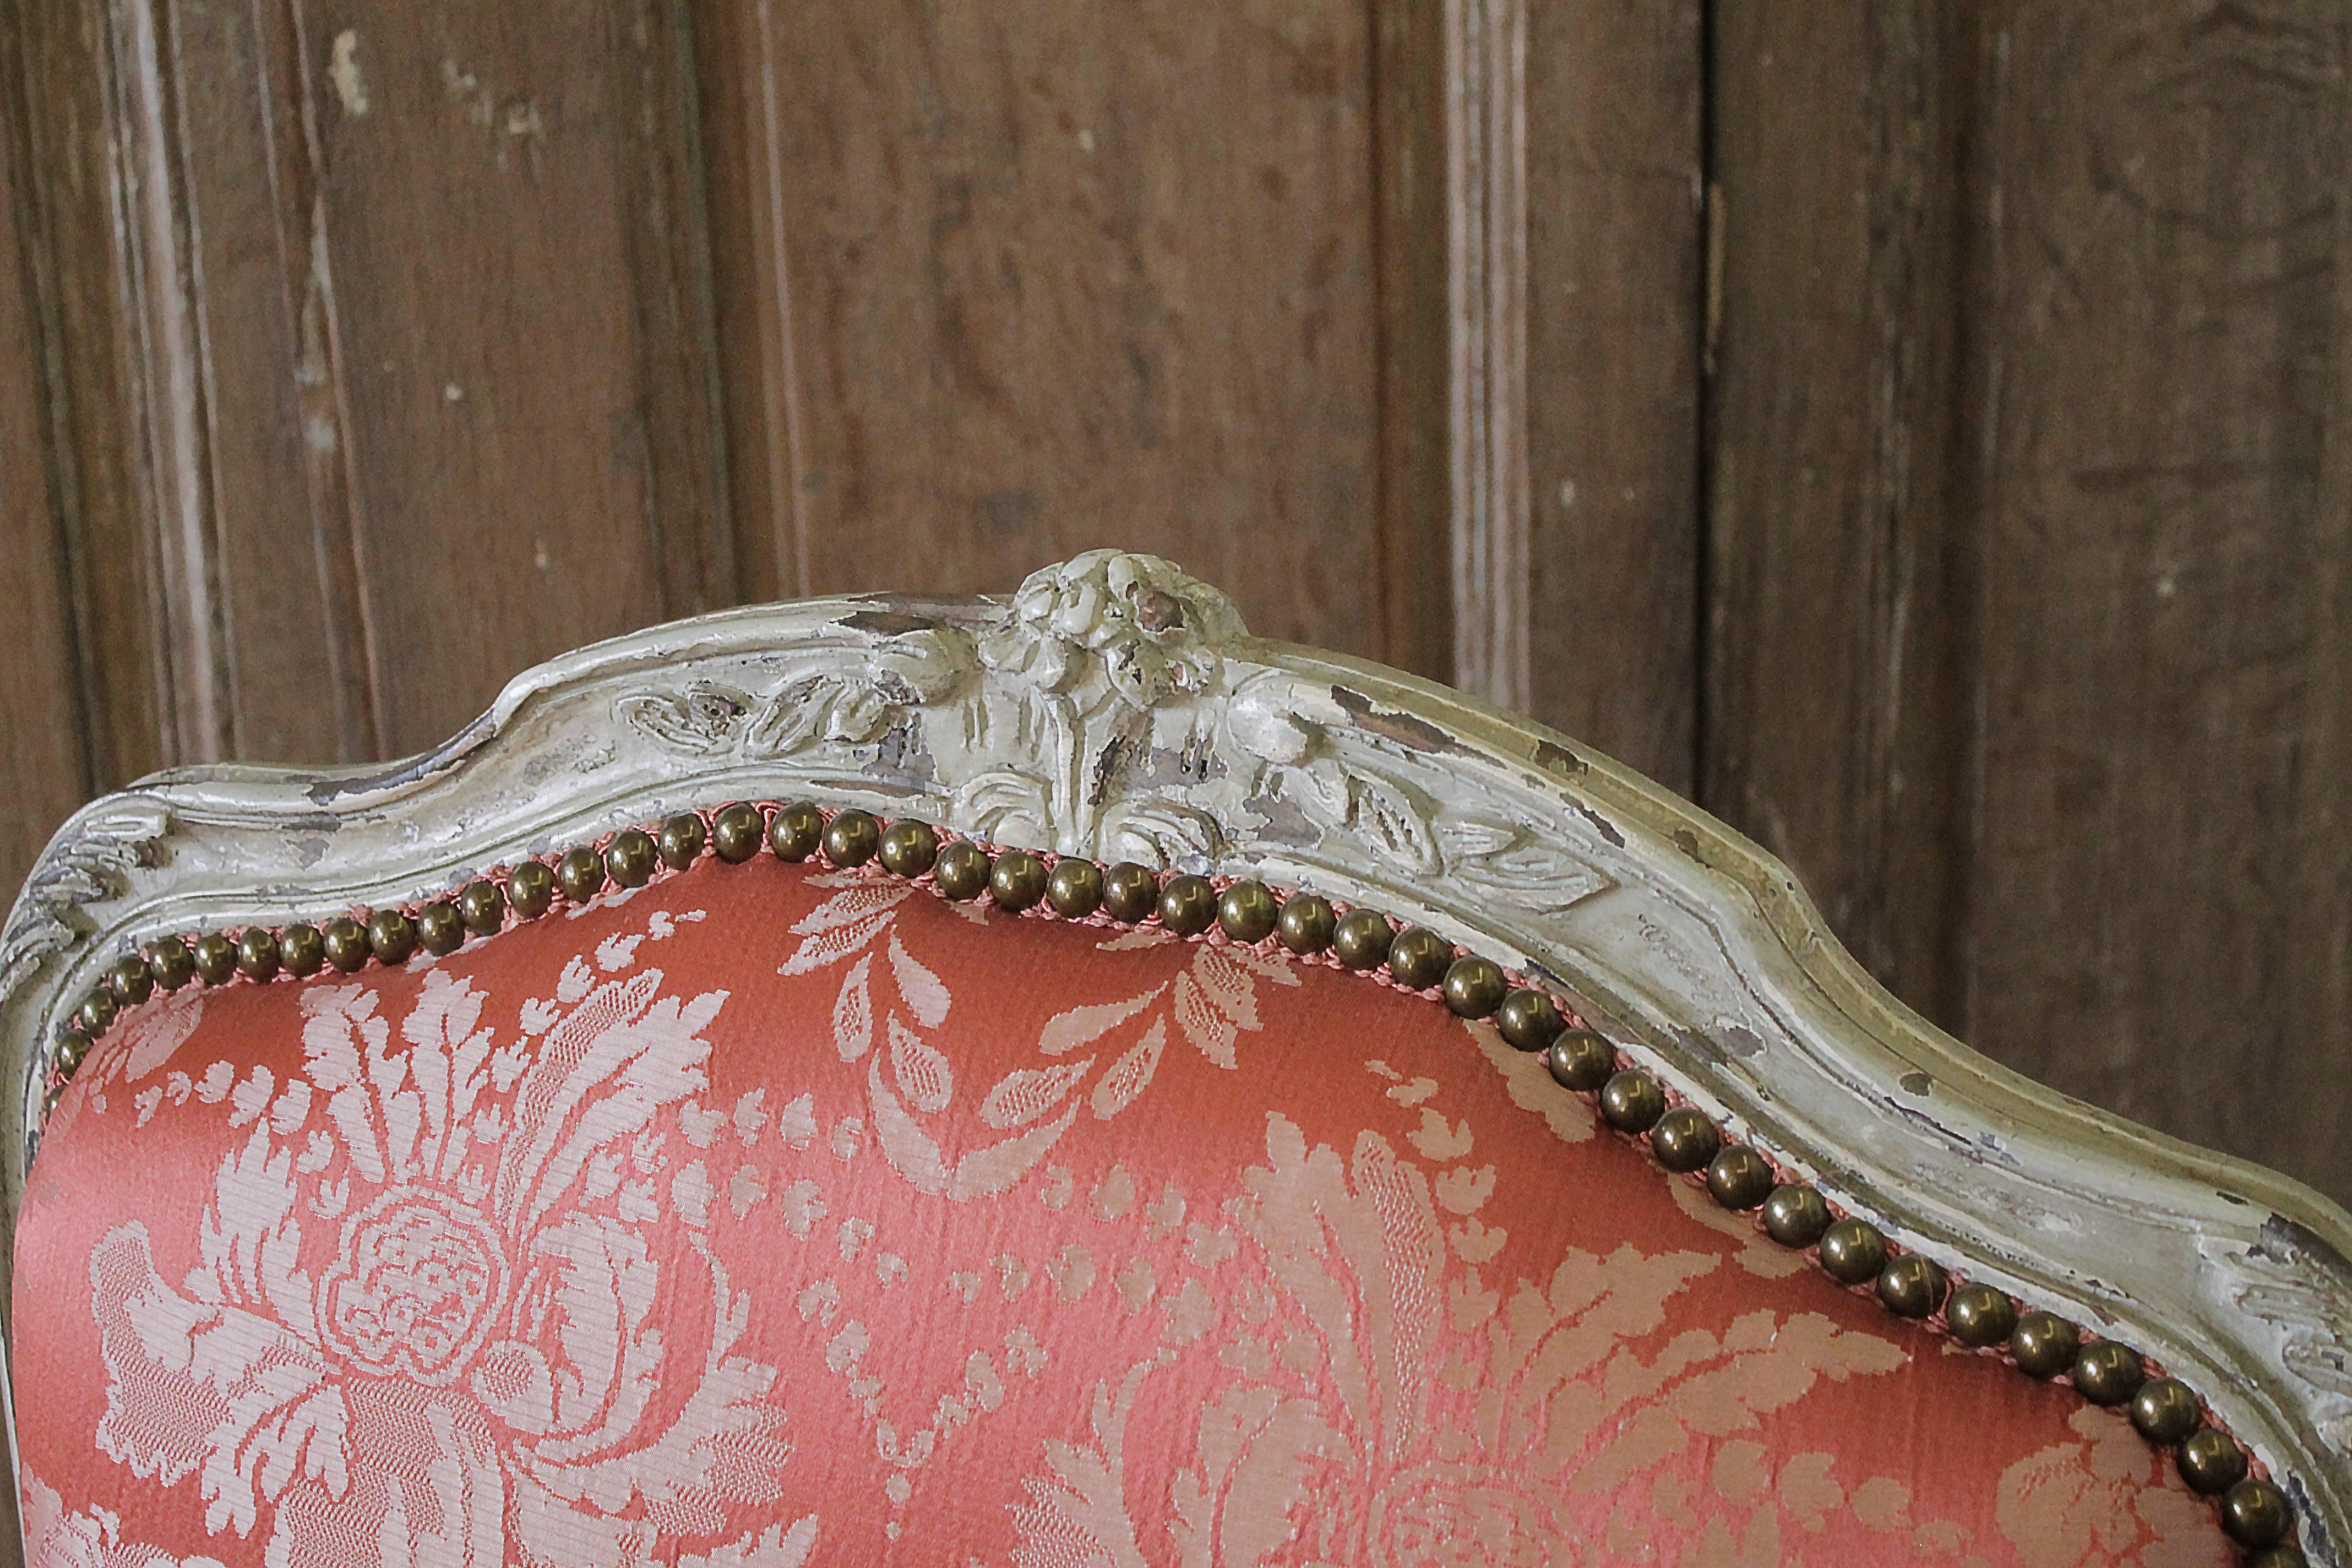 Gorgeous antique Louis XV Style original painted open arm chair, upholstered in Scalamandre silk fabric. The color is a rich deep salmon color with darker accent floral damask pattern. Seat is comfortable down cushion, finished with nail head